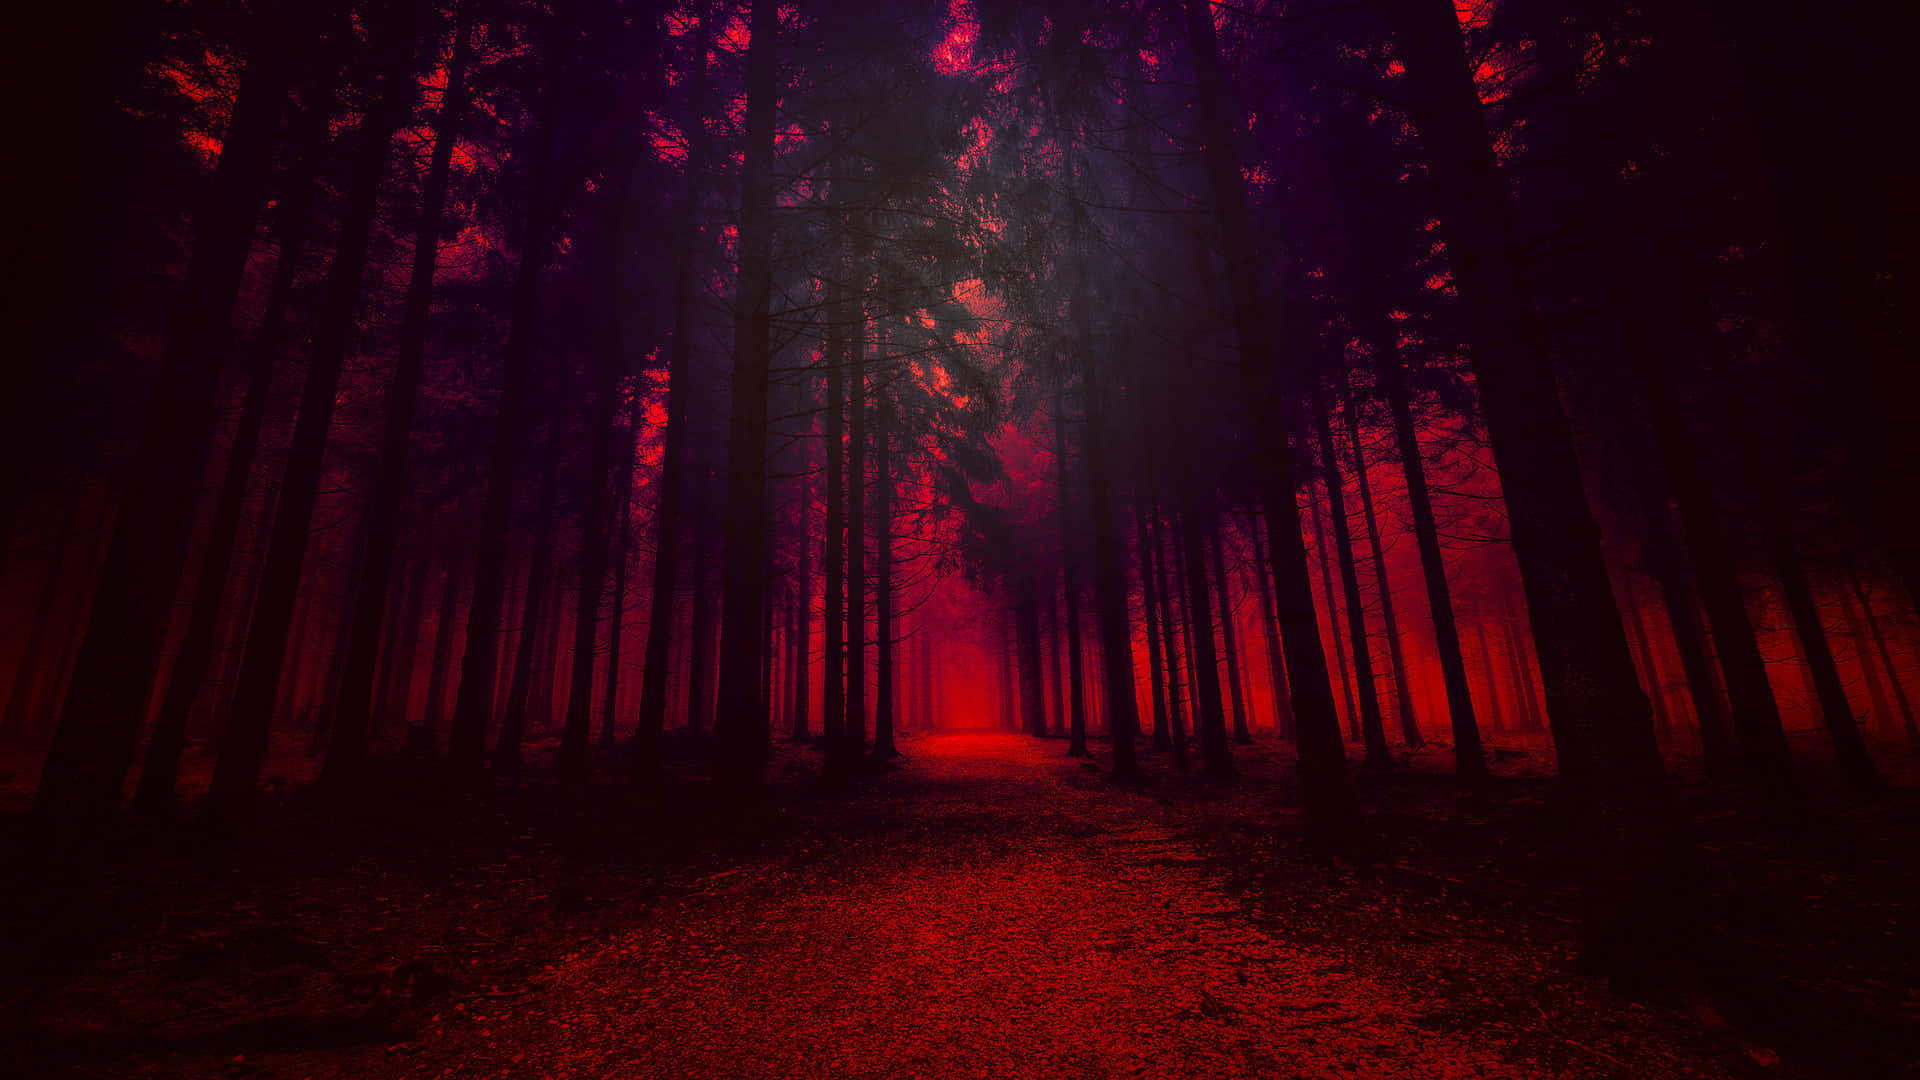 The breathtaking view of Red Forest, Nature's masterpiece Wallpaper